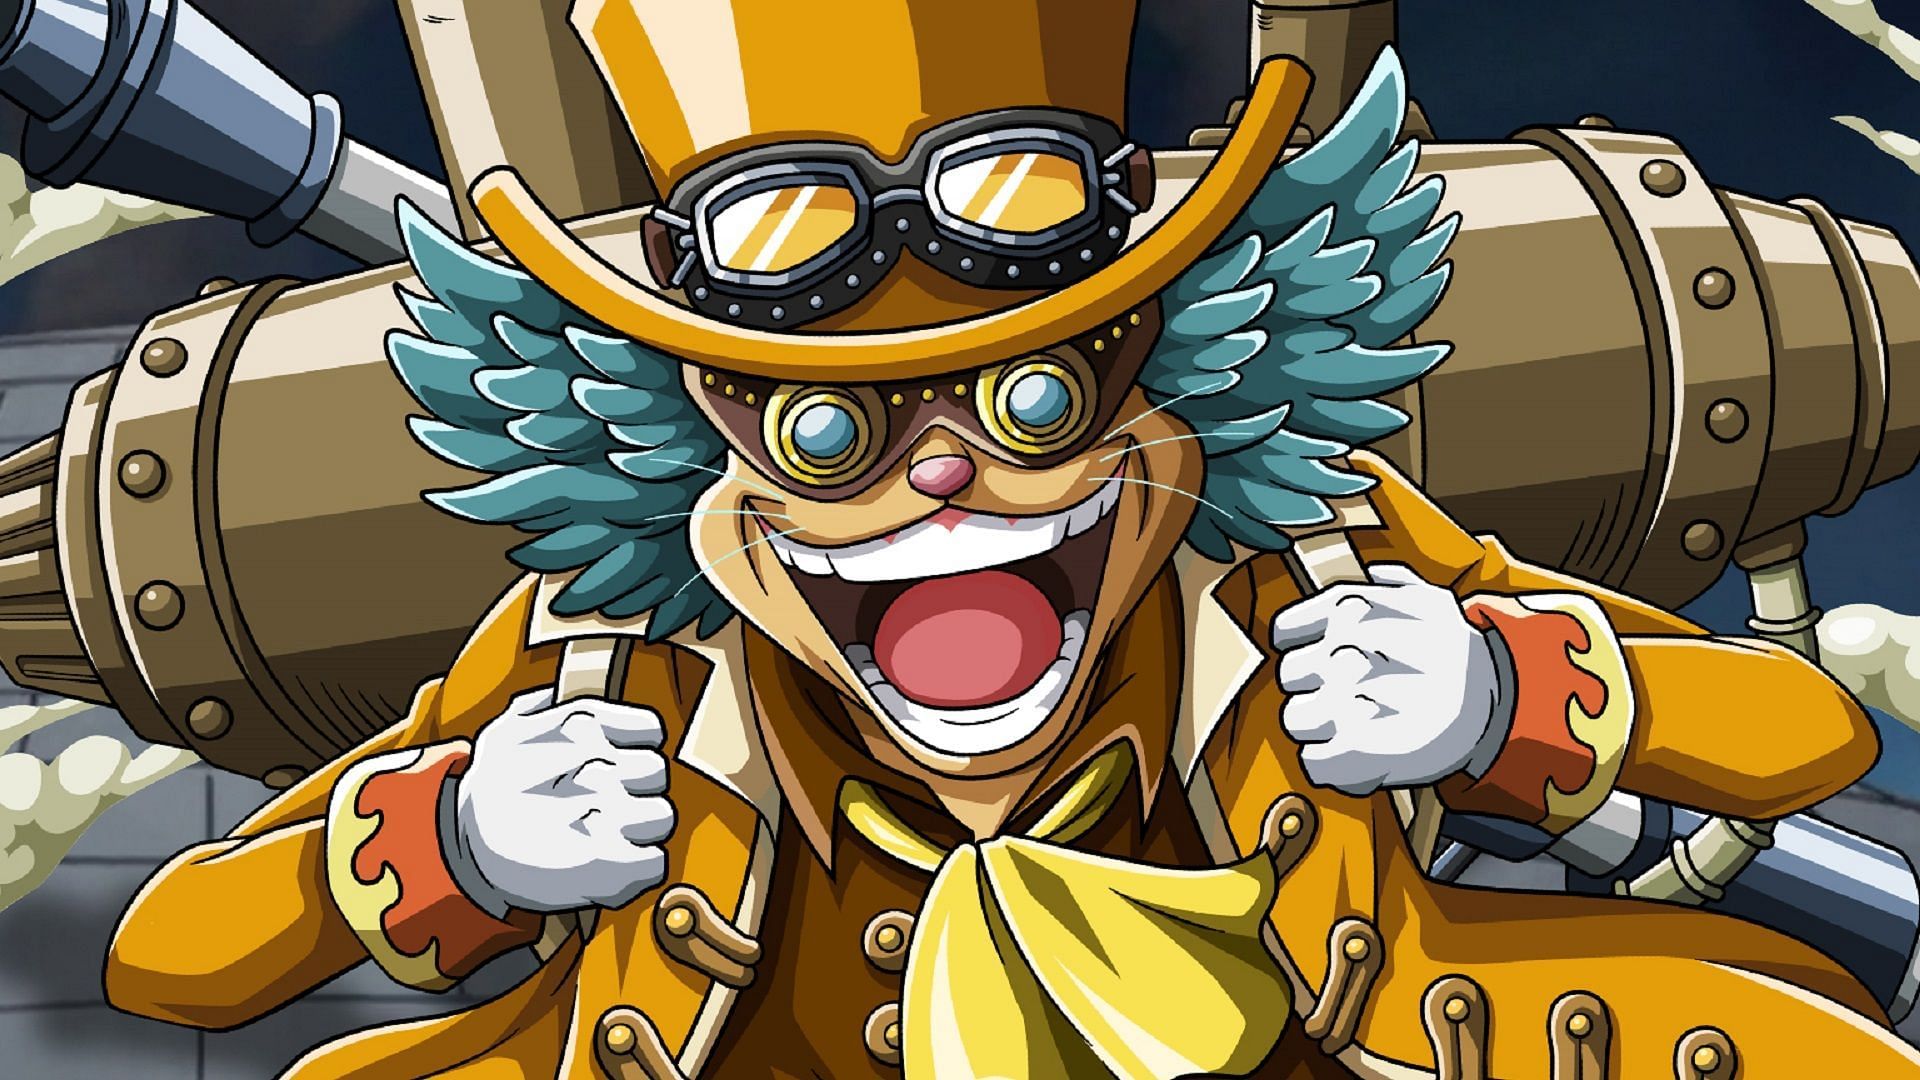 Lindbergh as seen in One Piece (Image via Toei Animation, One Piece)